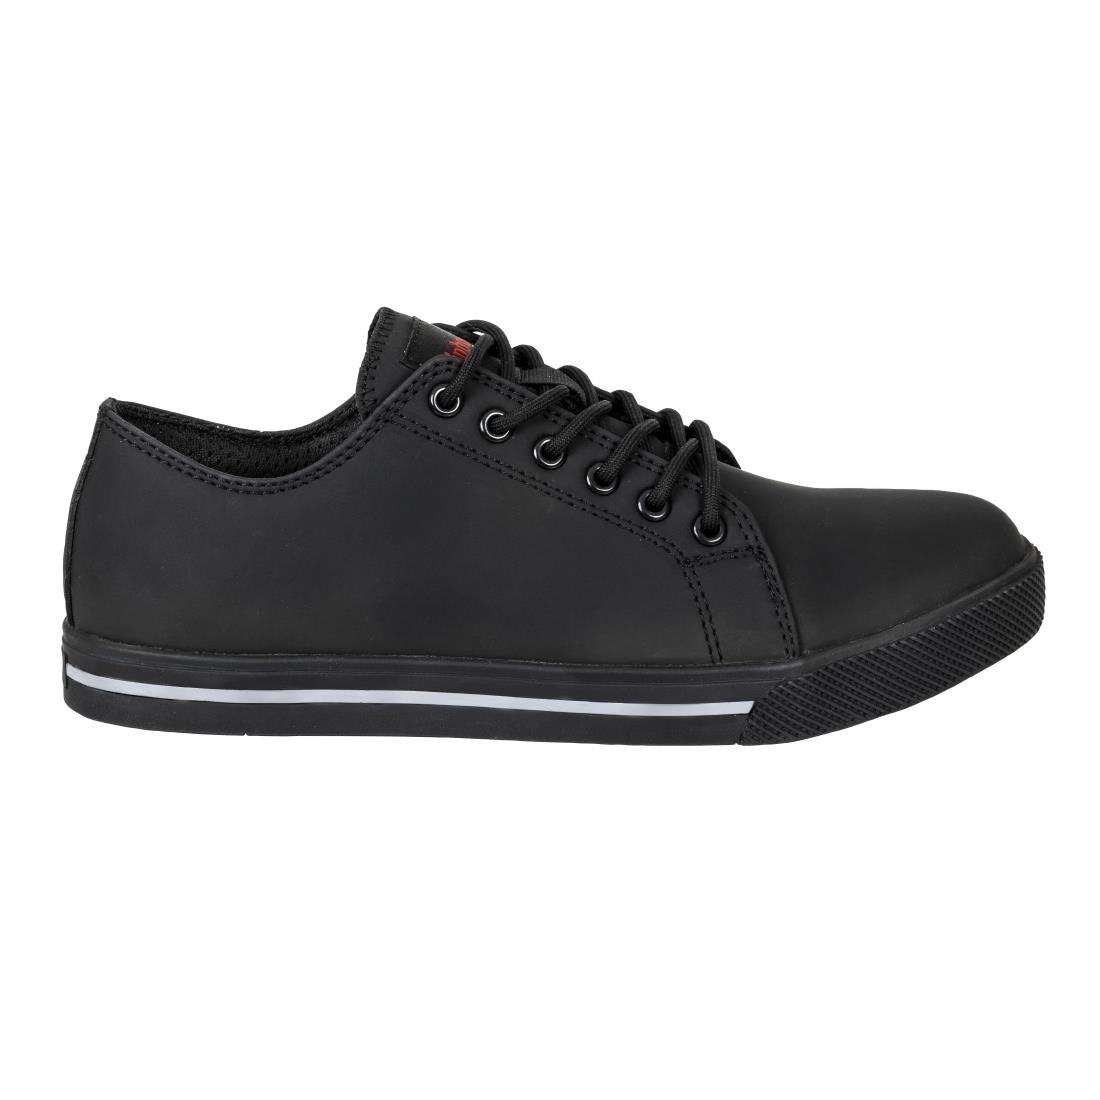 BA060-42 Slipbuster Recycled Microfibre Safety Trainers Matte Black 42 JD Catering Equipment Solutions Ltd